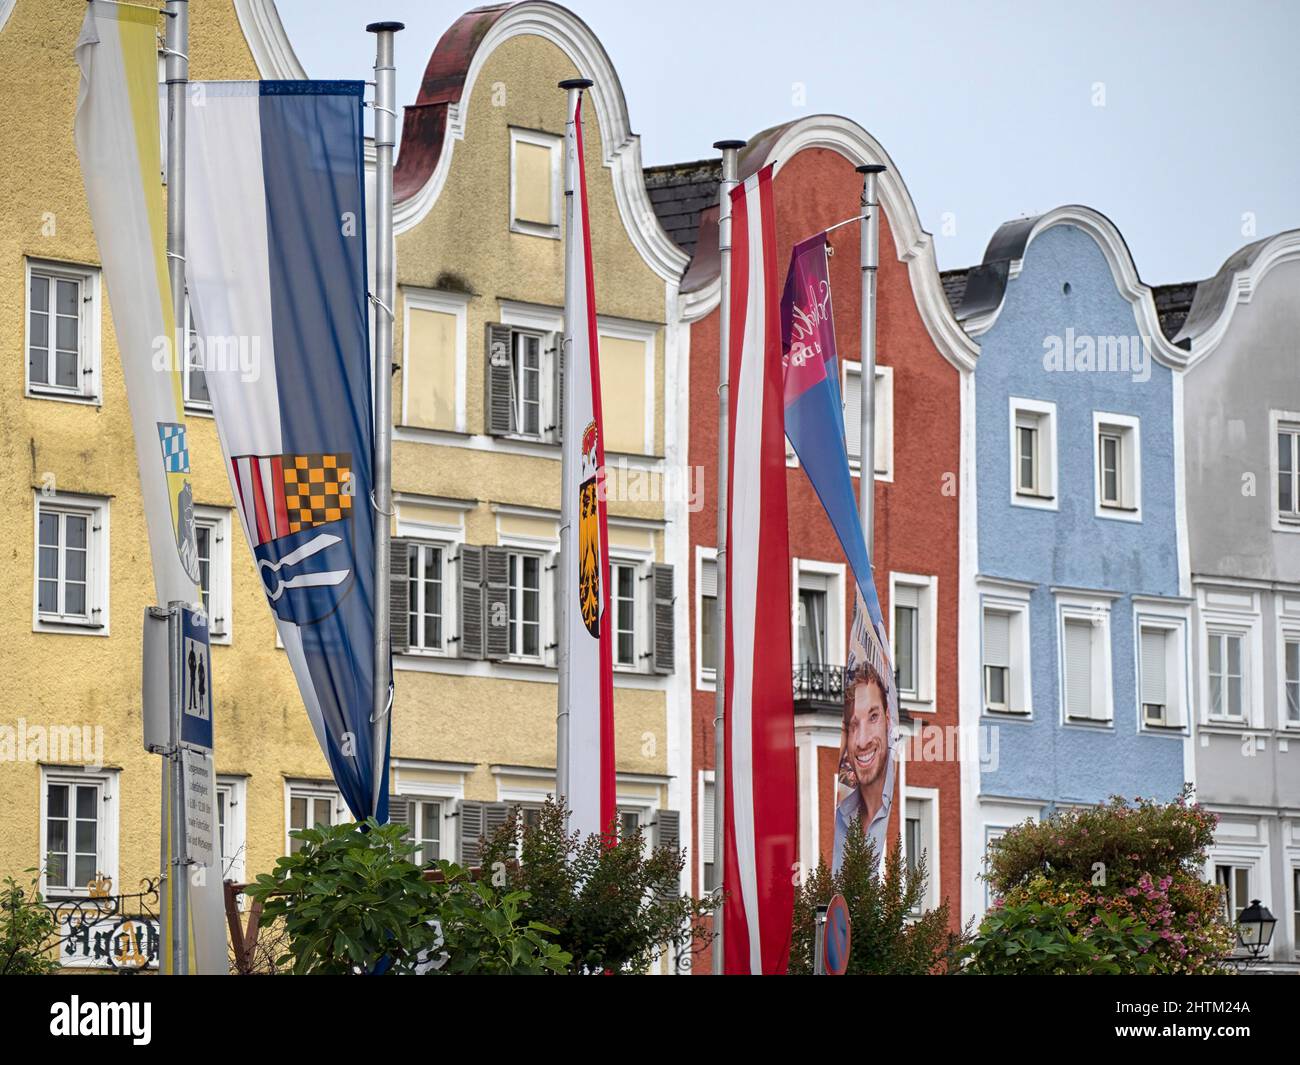 SCHARDING, AUSTRIA - JULY 12, 2019:  Banner signs outside the colourful Baroque town houses of Oberer Stadtplatz Stock Photo